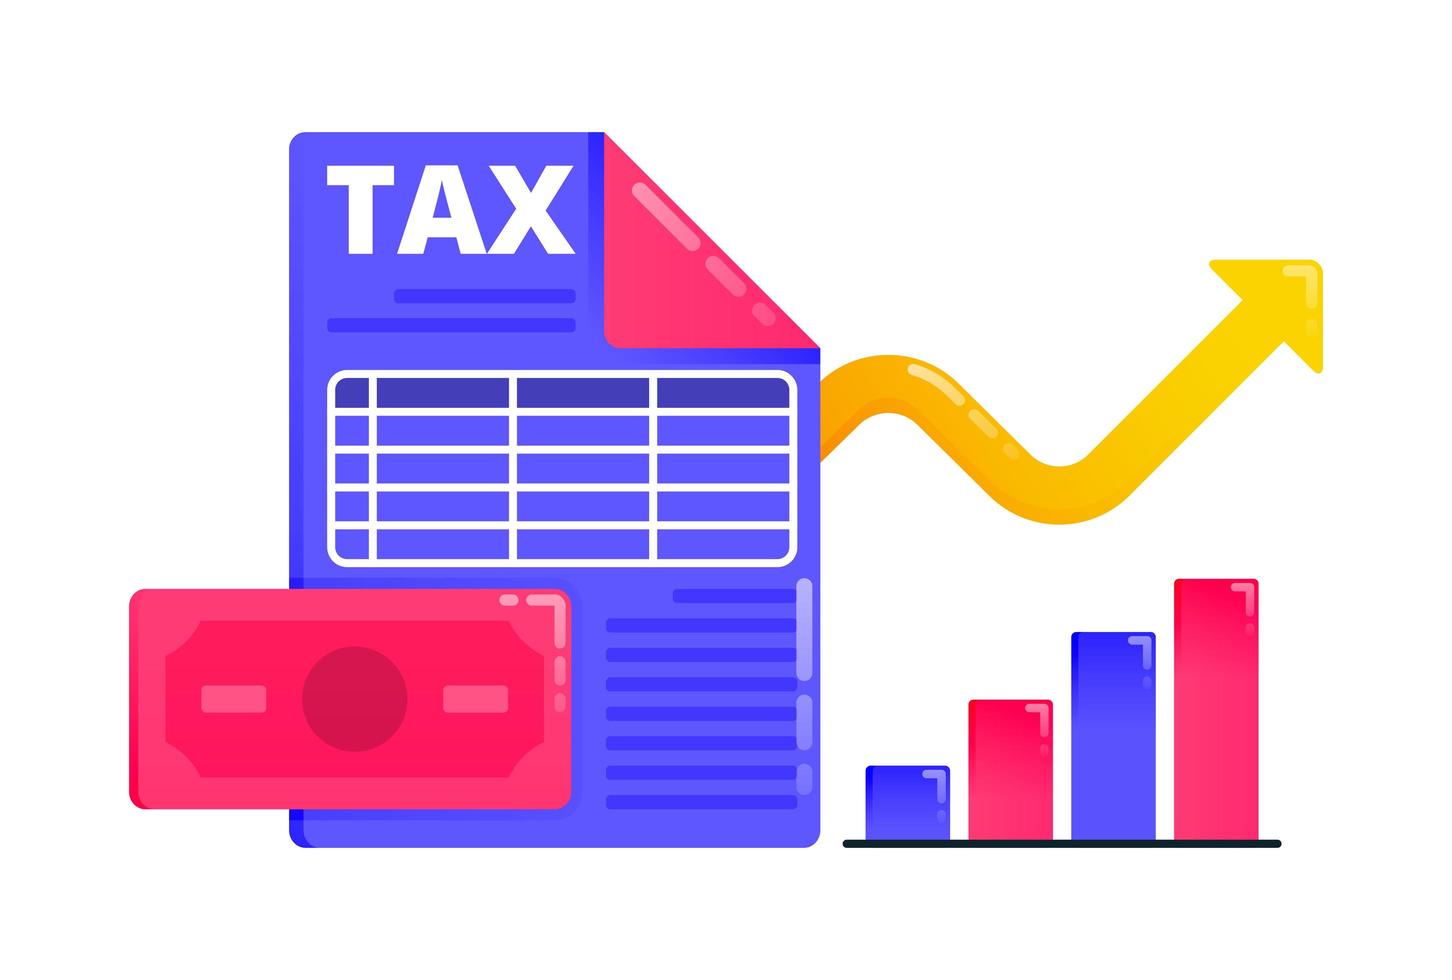 Design for increase economic and tax revenue, tax reporting and financial income. Can also be used for business, icon design, and graphic elements vector